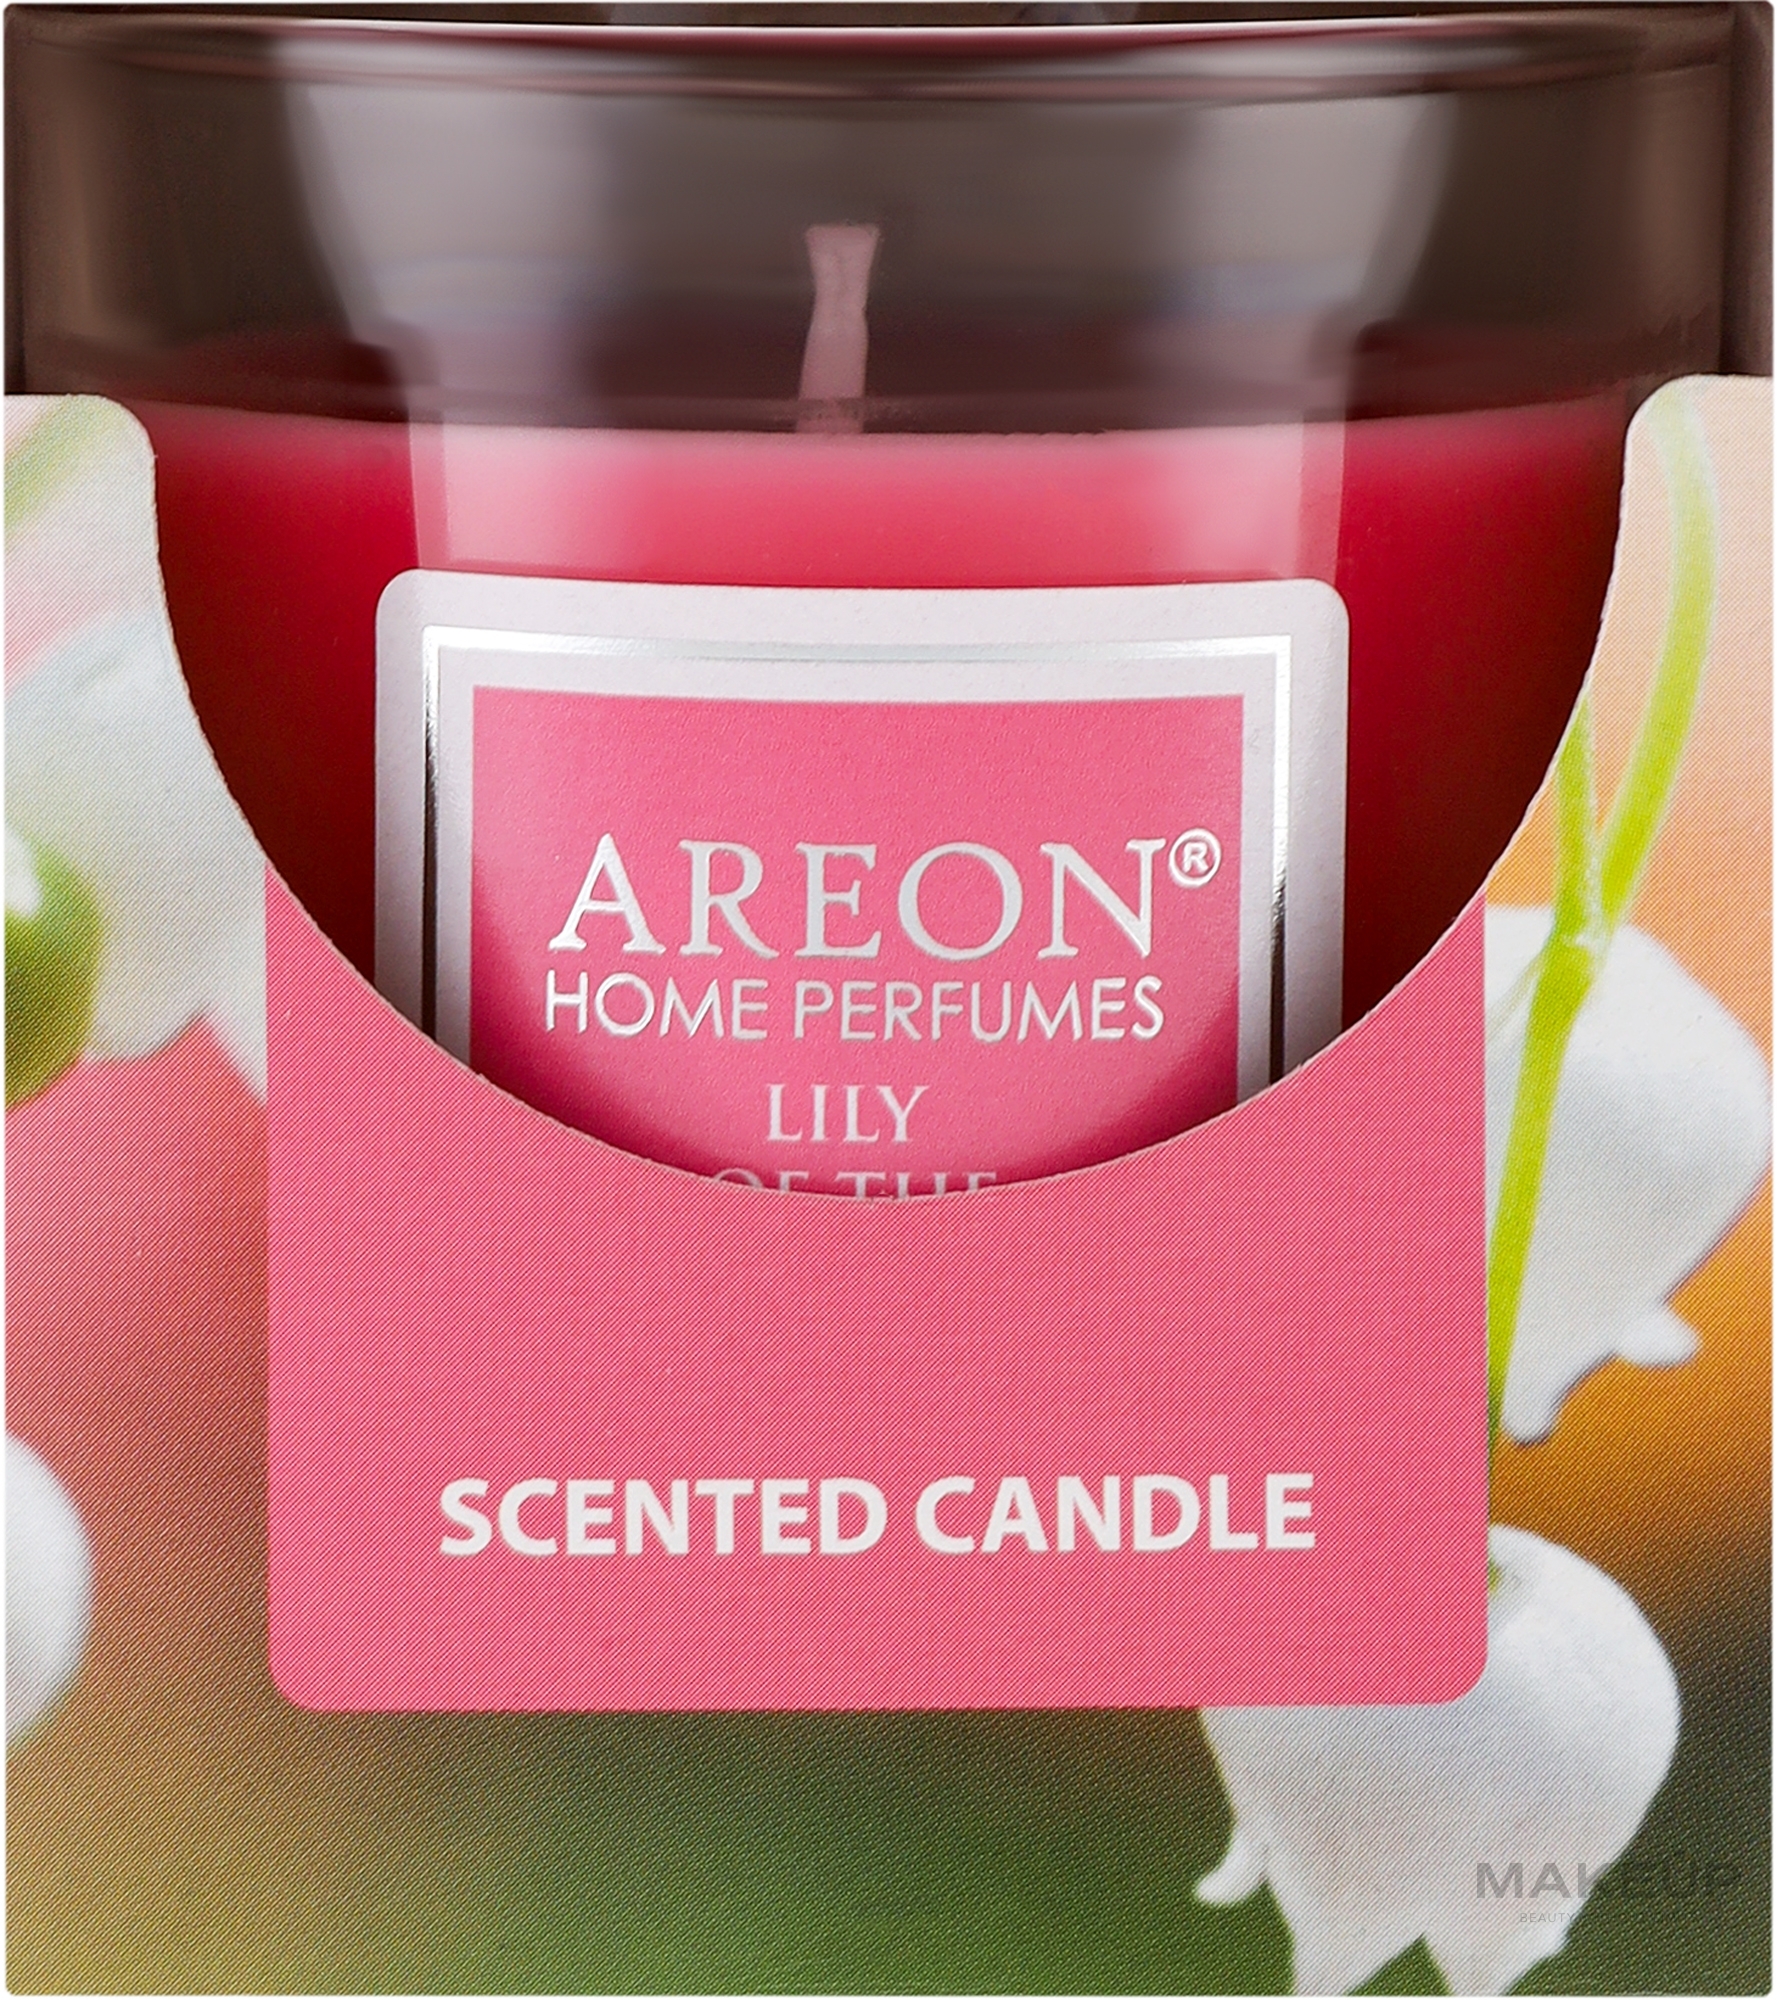 Duftkerze im Glas Maiglöckchen - Areon Home Perfumes Lily of the Valley Scented Candle — Bild 120 g